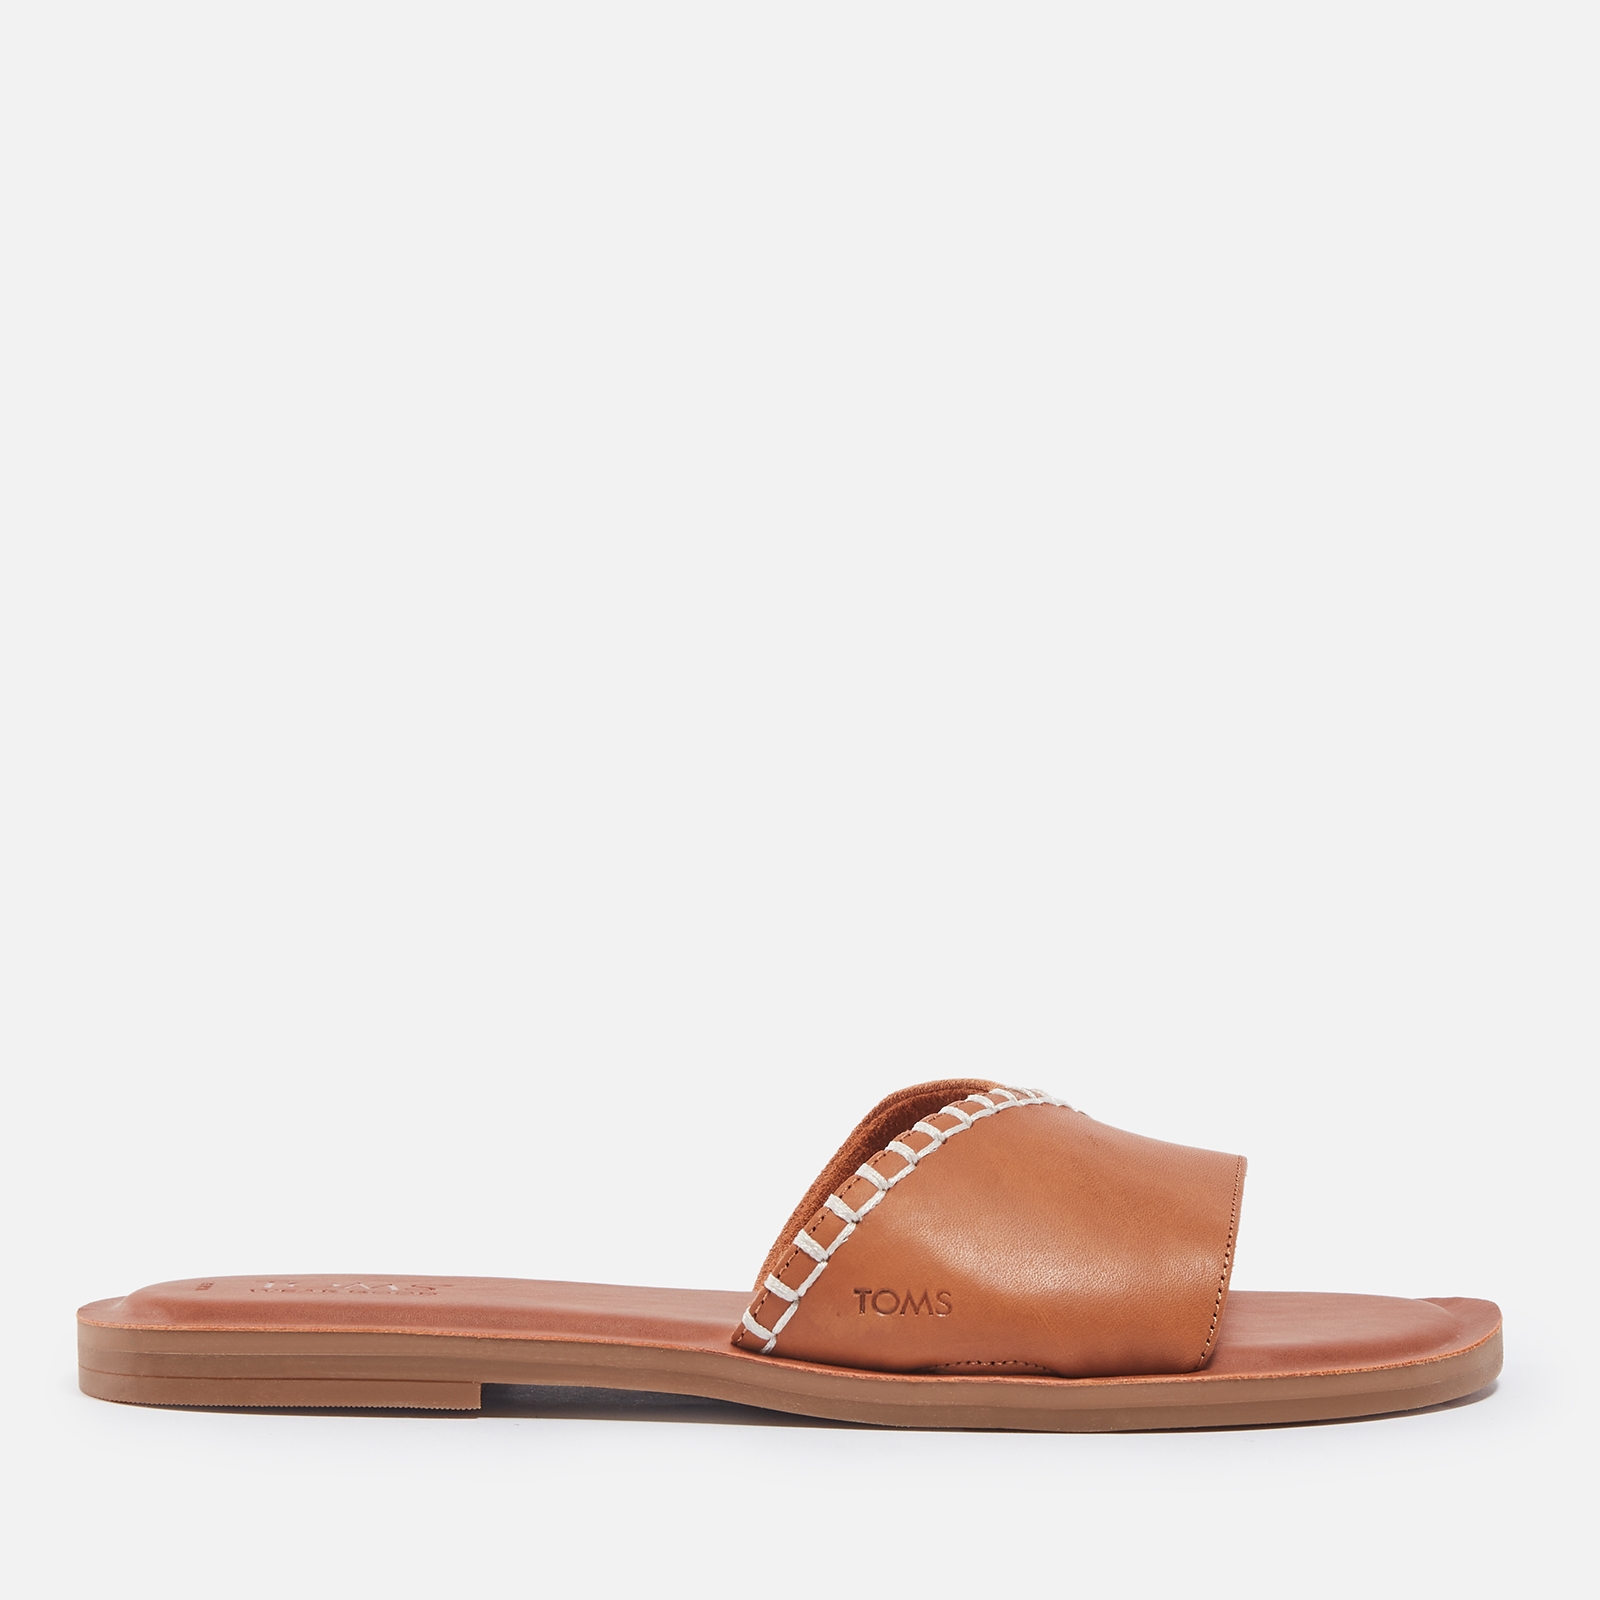 TOMS Women's Shea Leather and Suede Sandals - UK 3 von TOMS